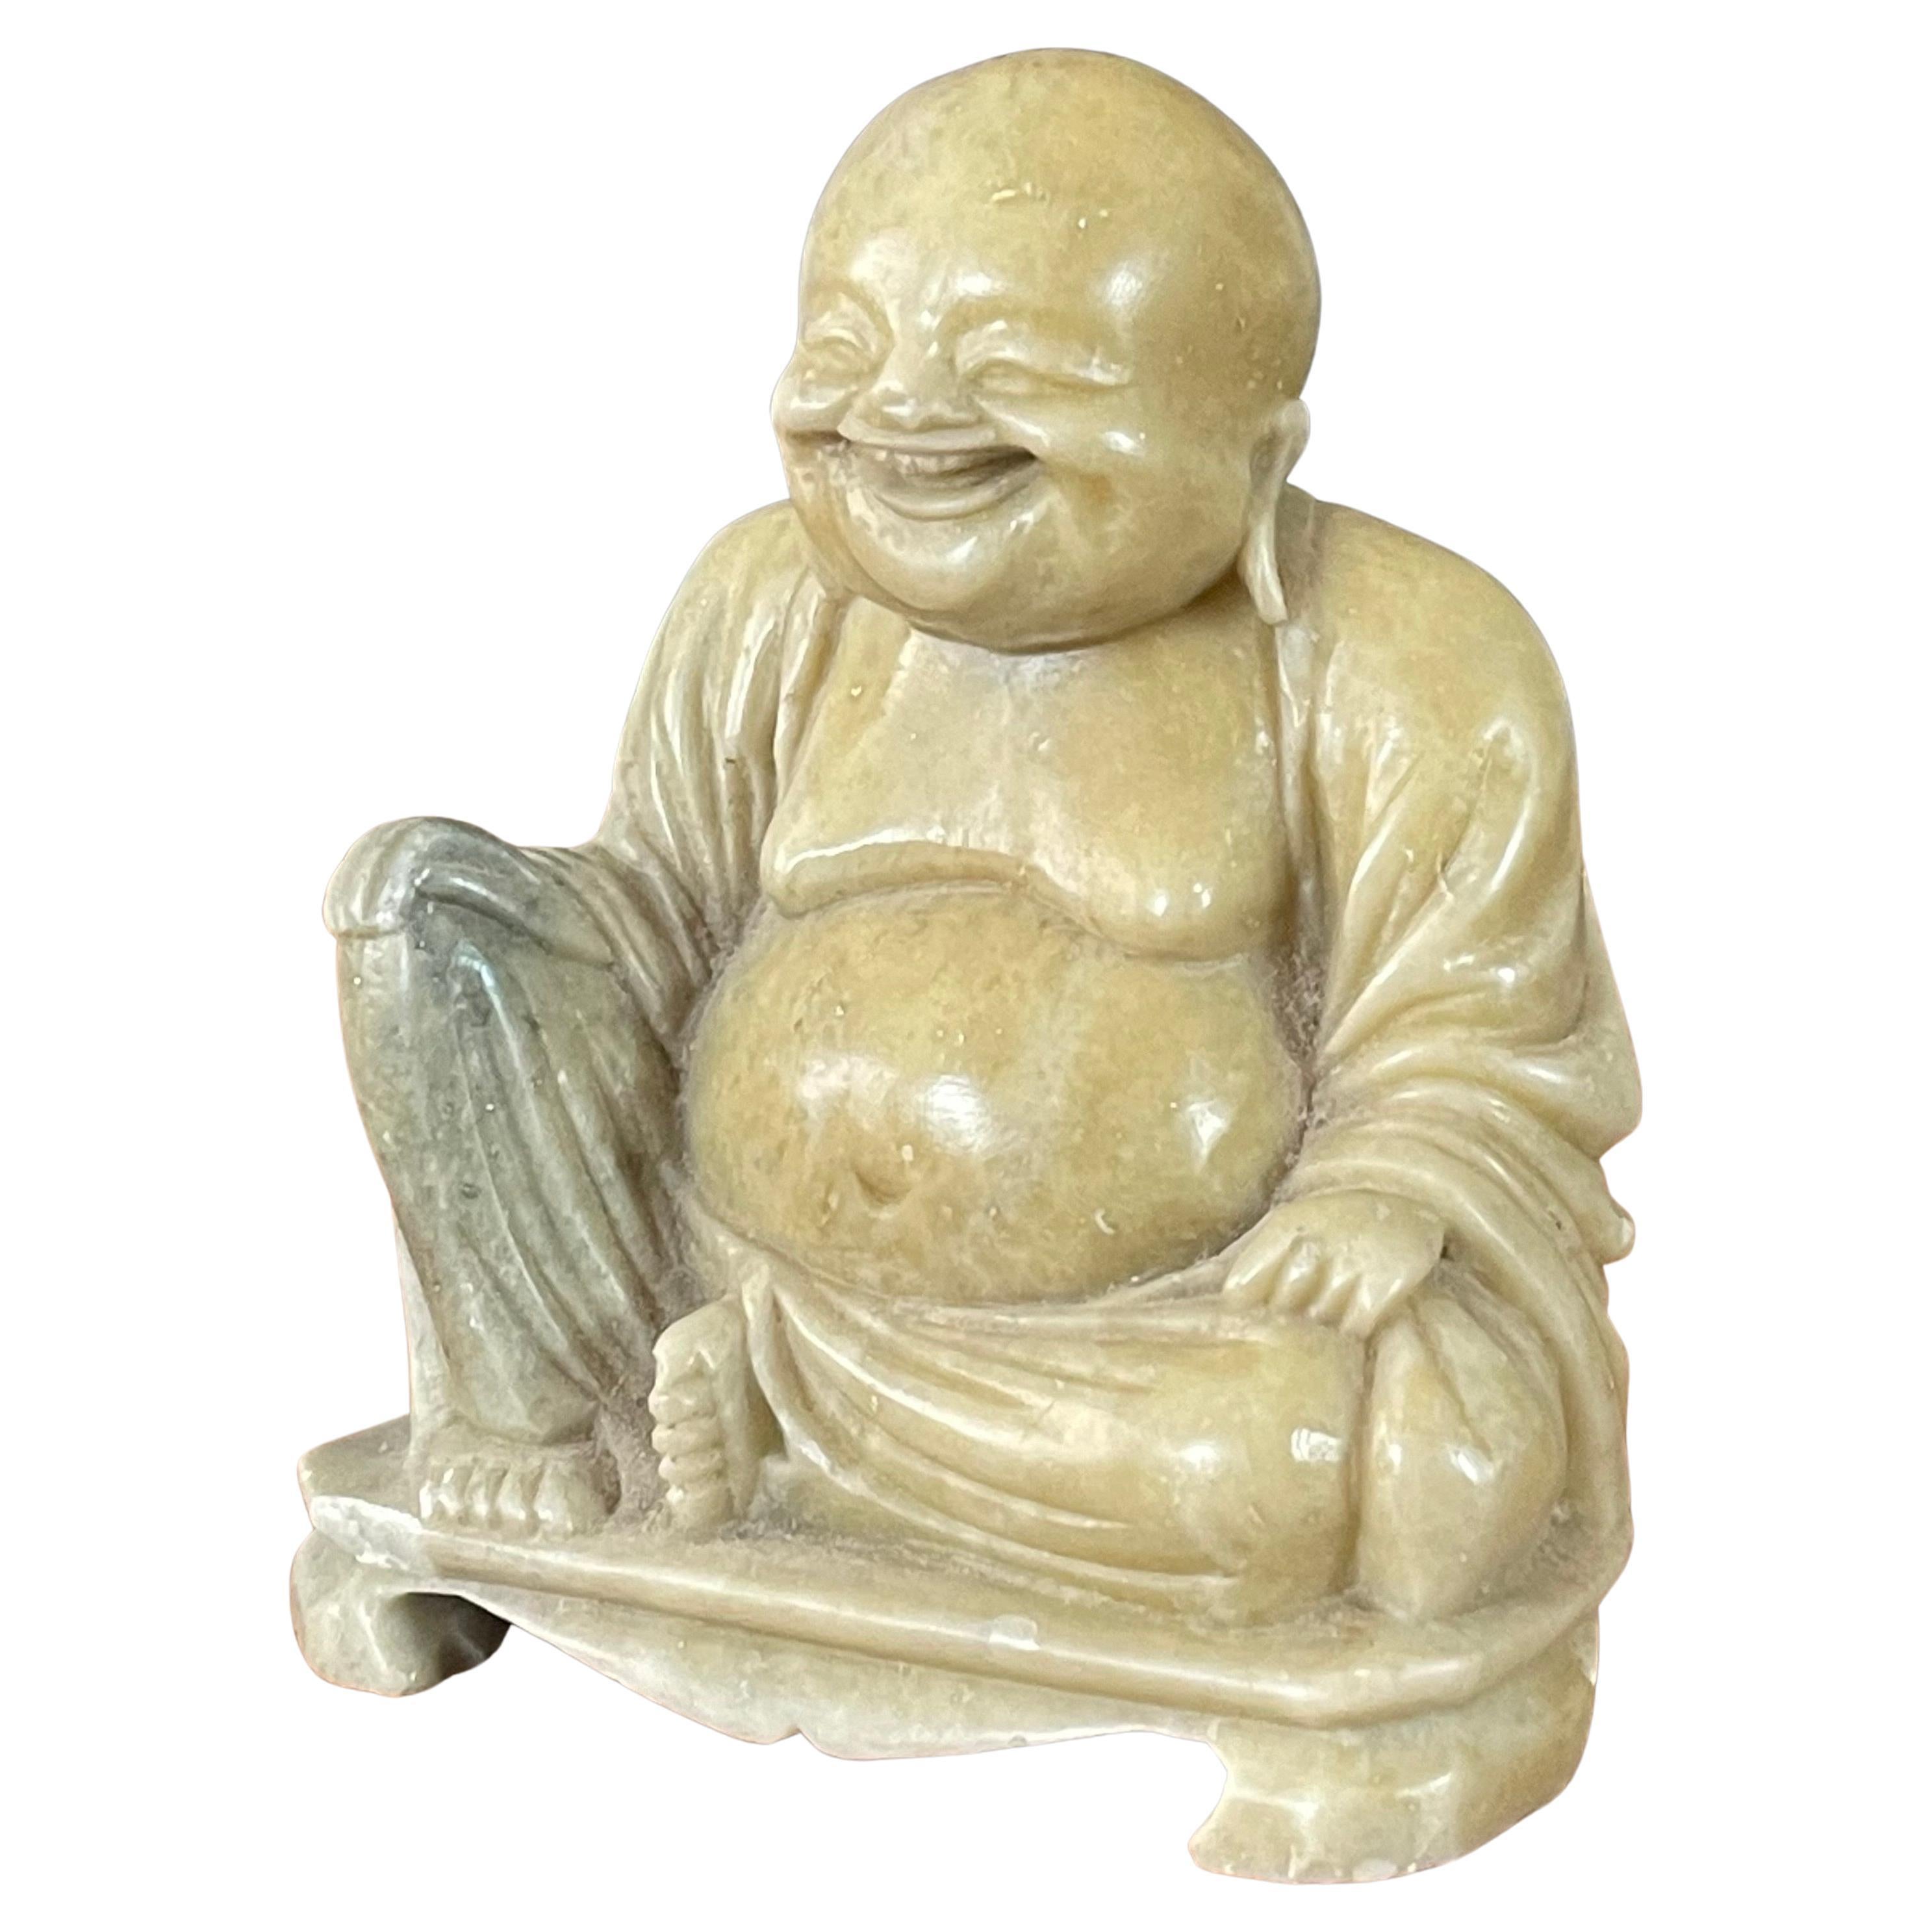 Hand-Carved Soapstone "Happy Buddha" Sculpture